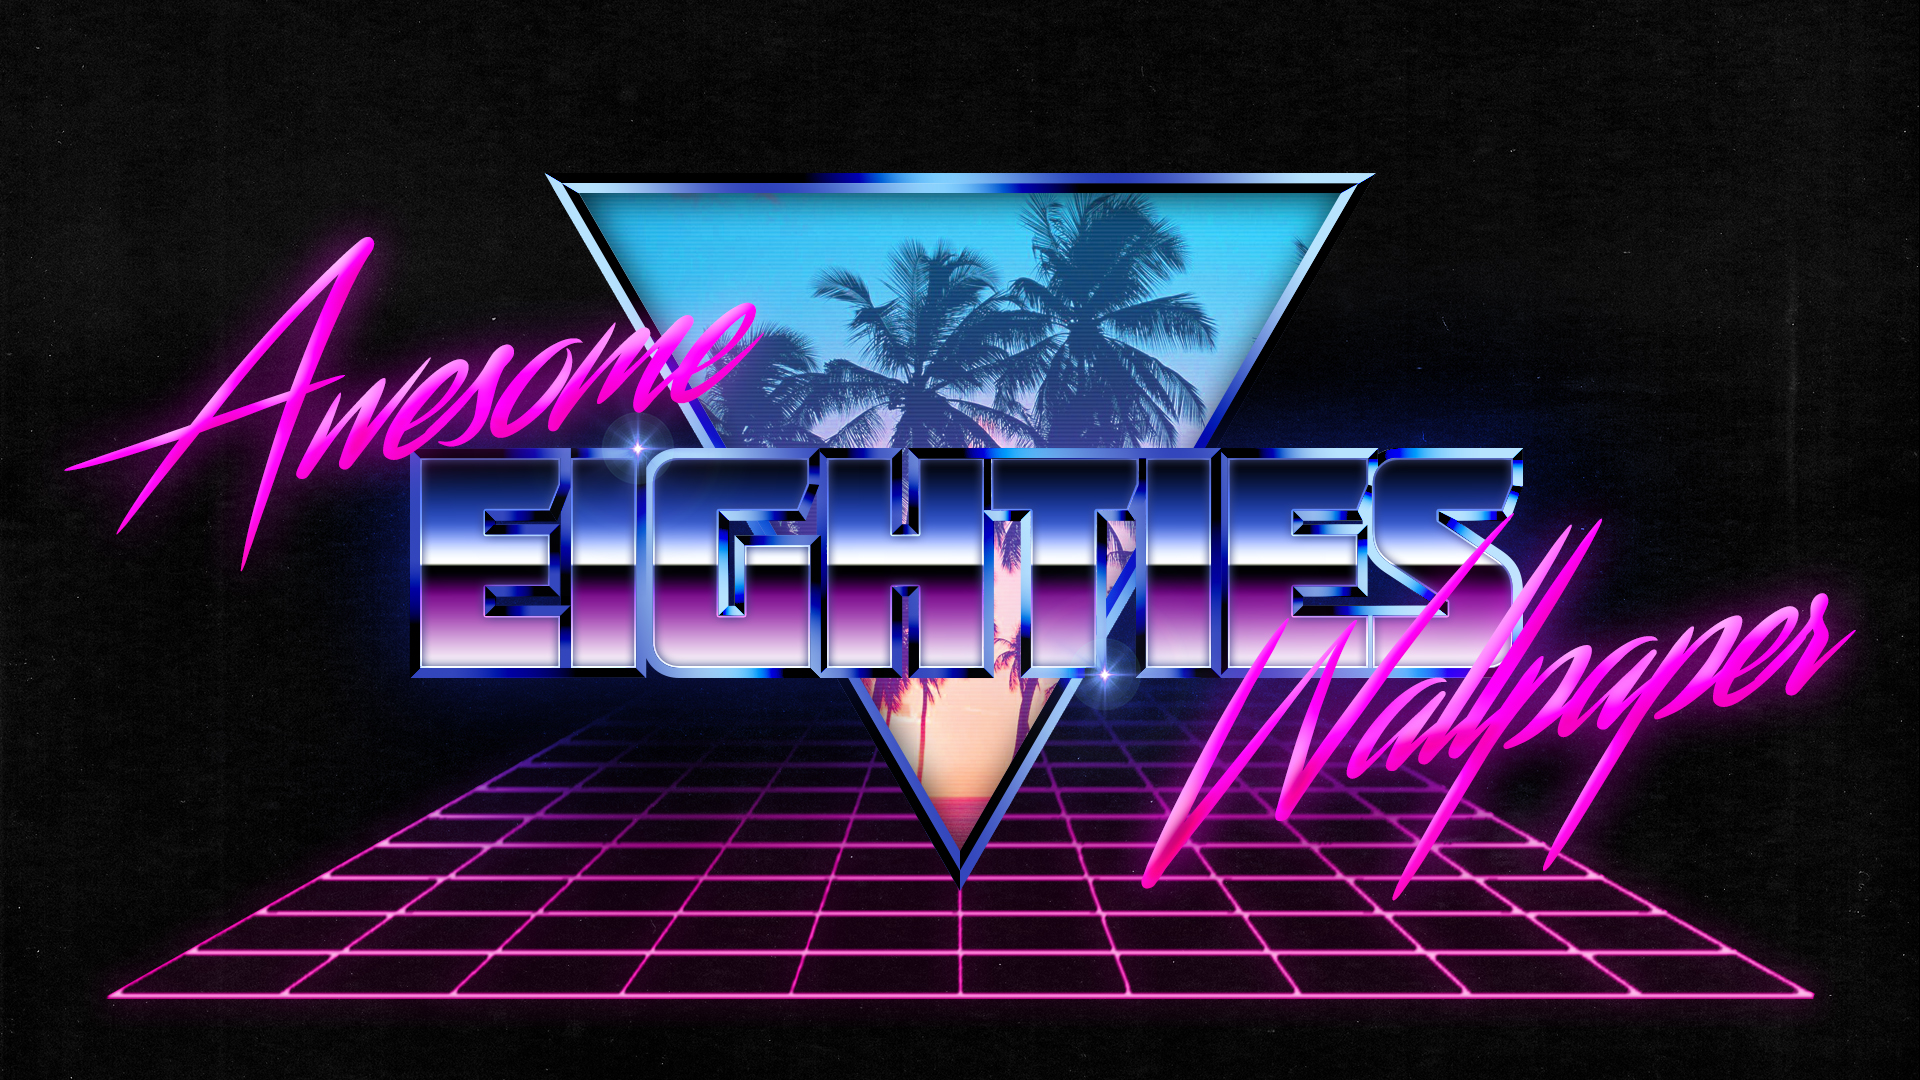 Awesome 80s Wallpaper by valithevali on